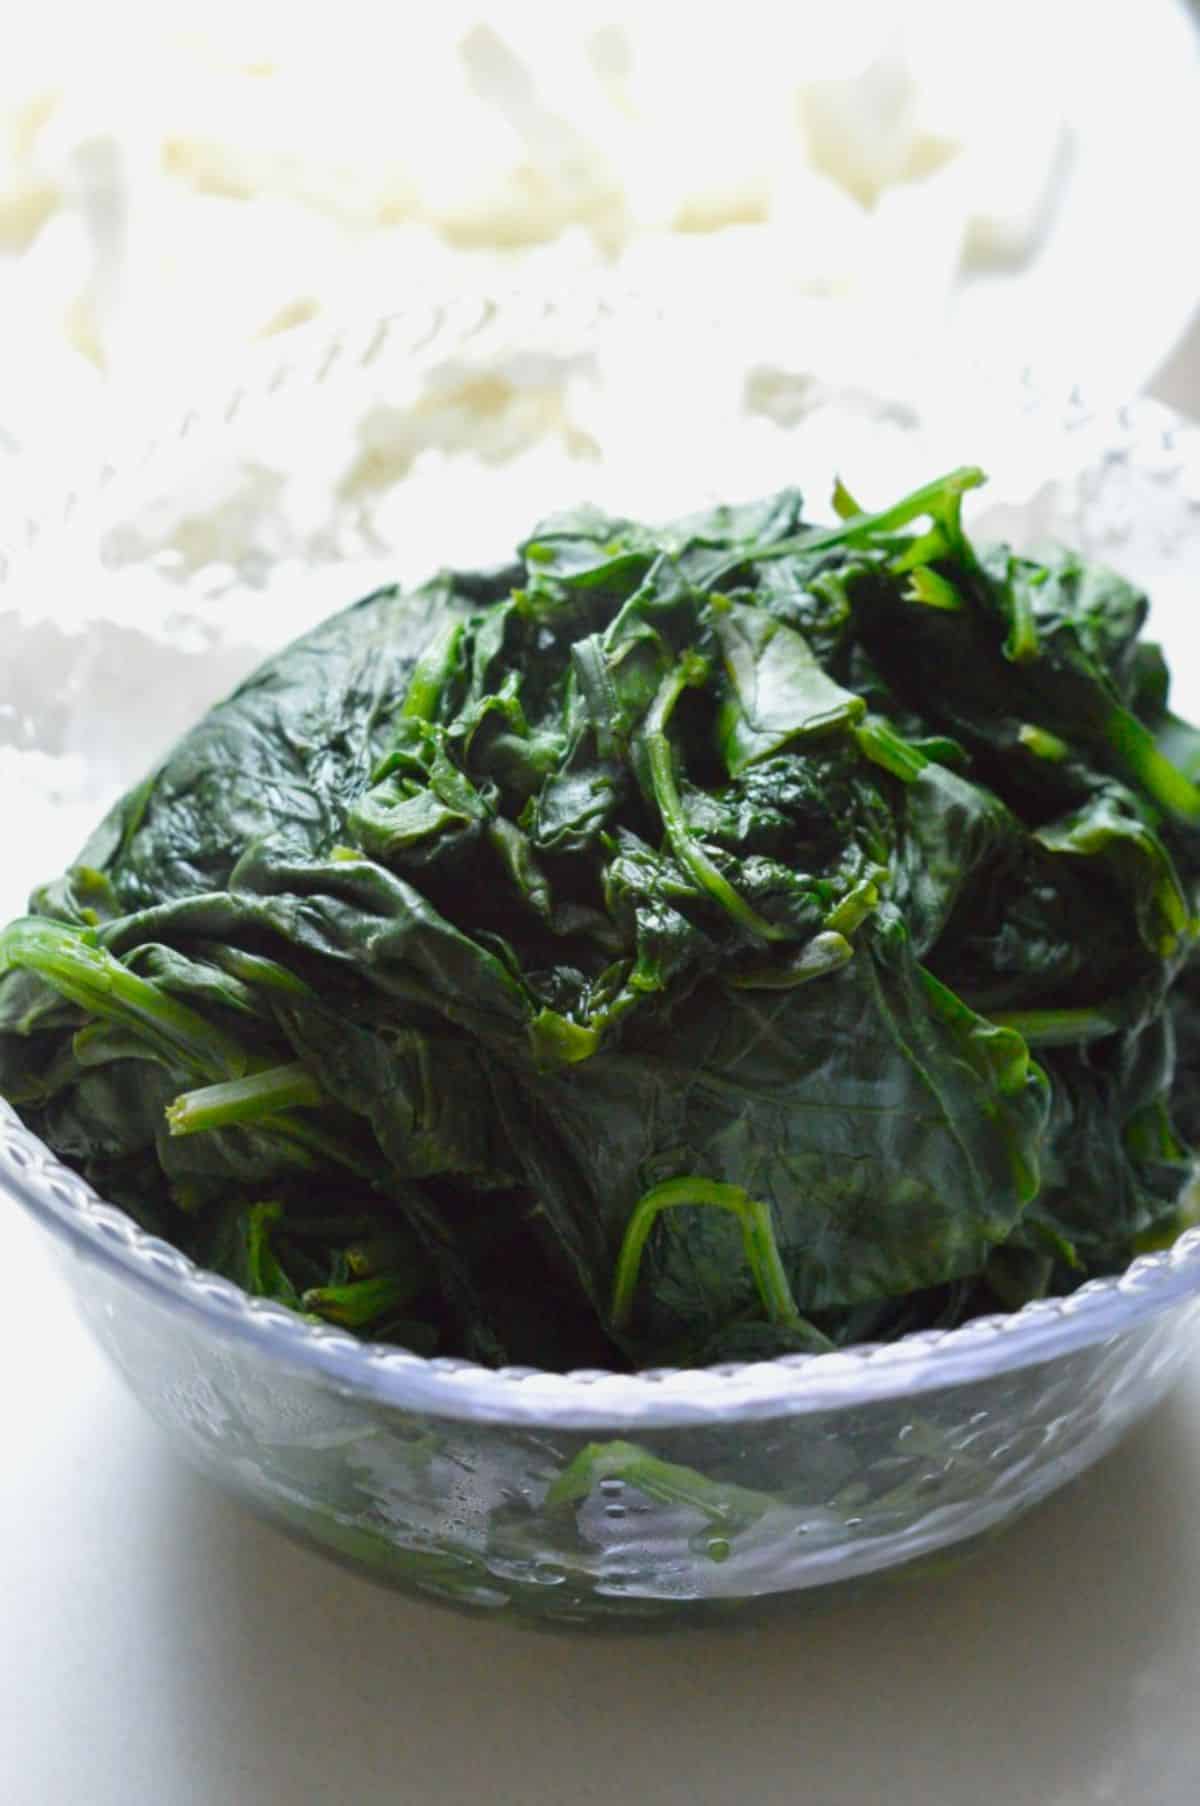 A plastic container full of washed spinach.